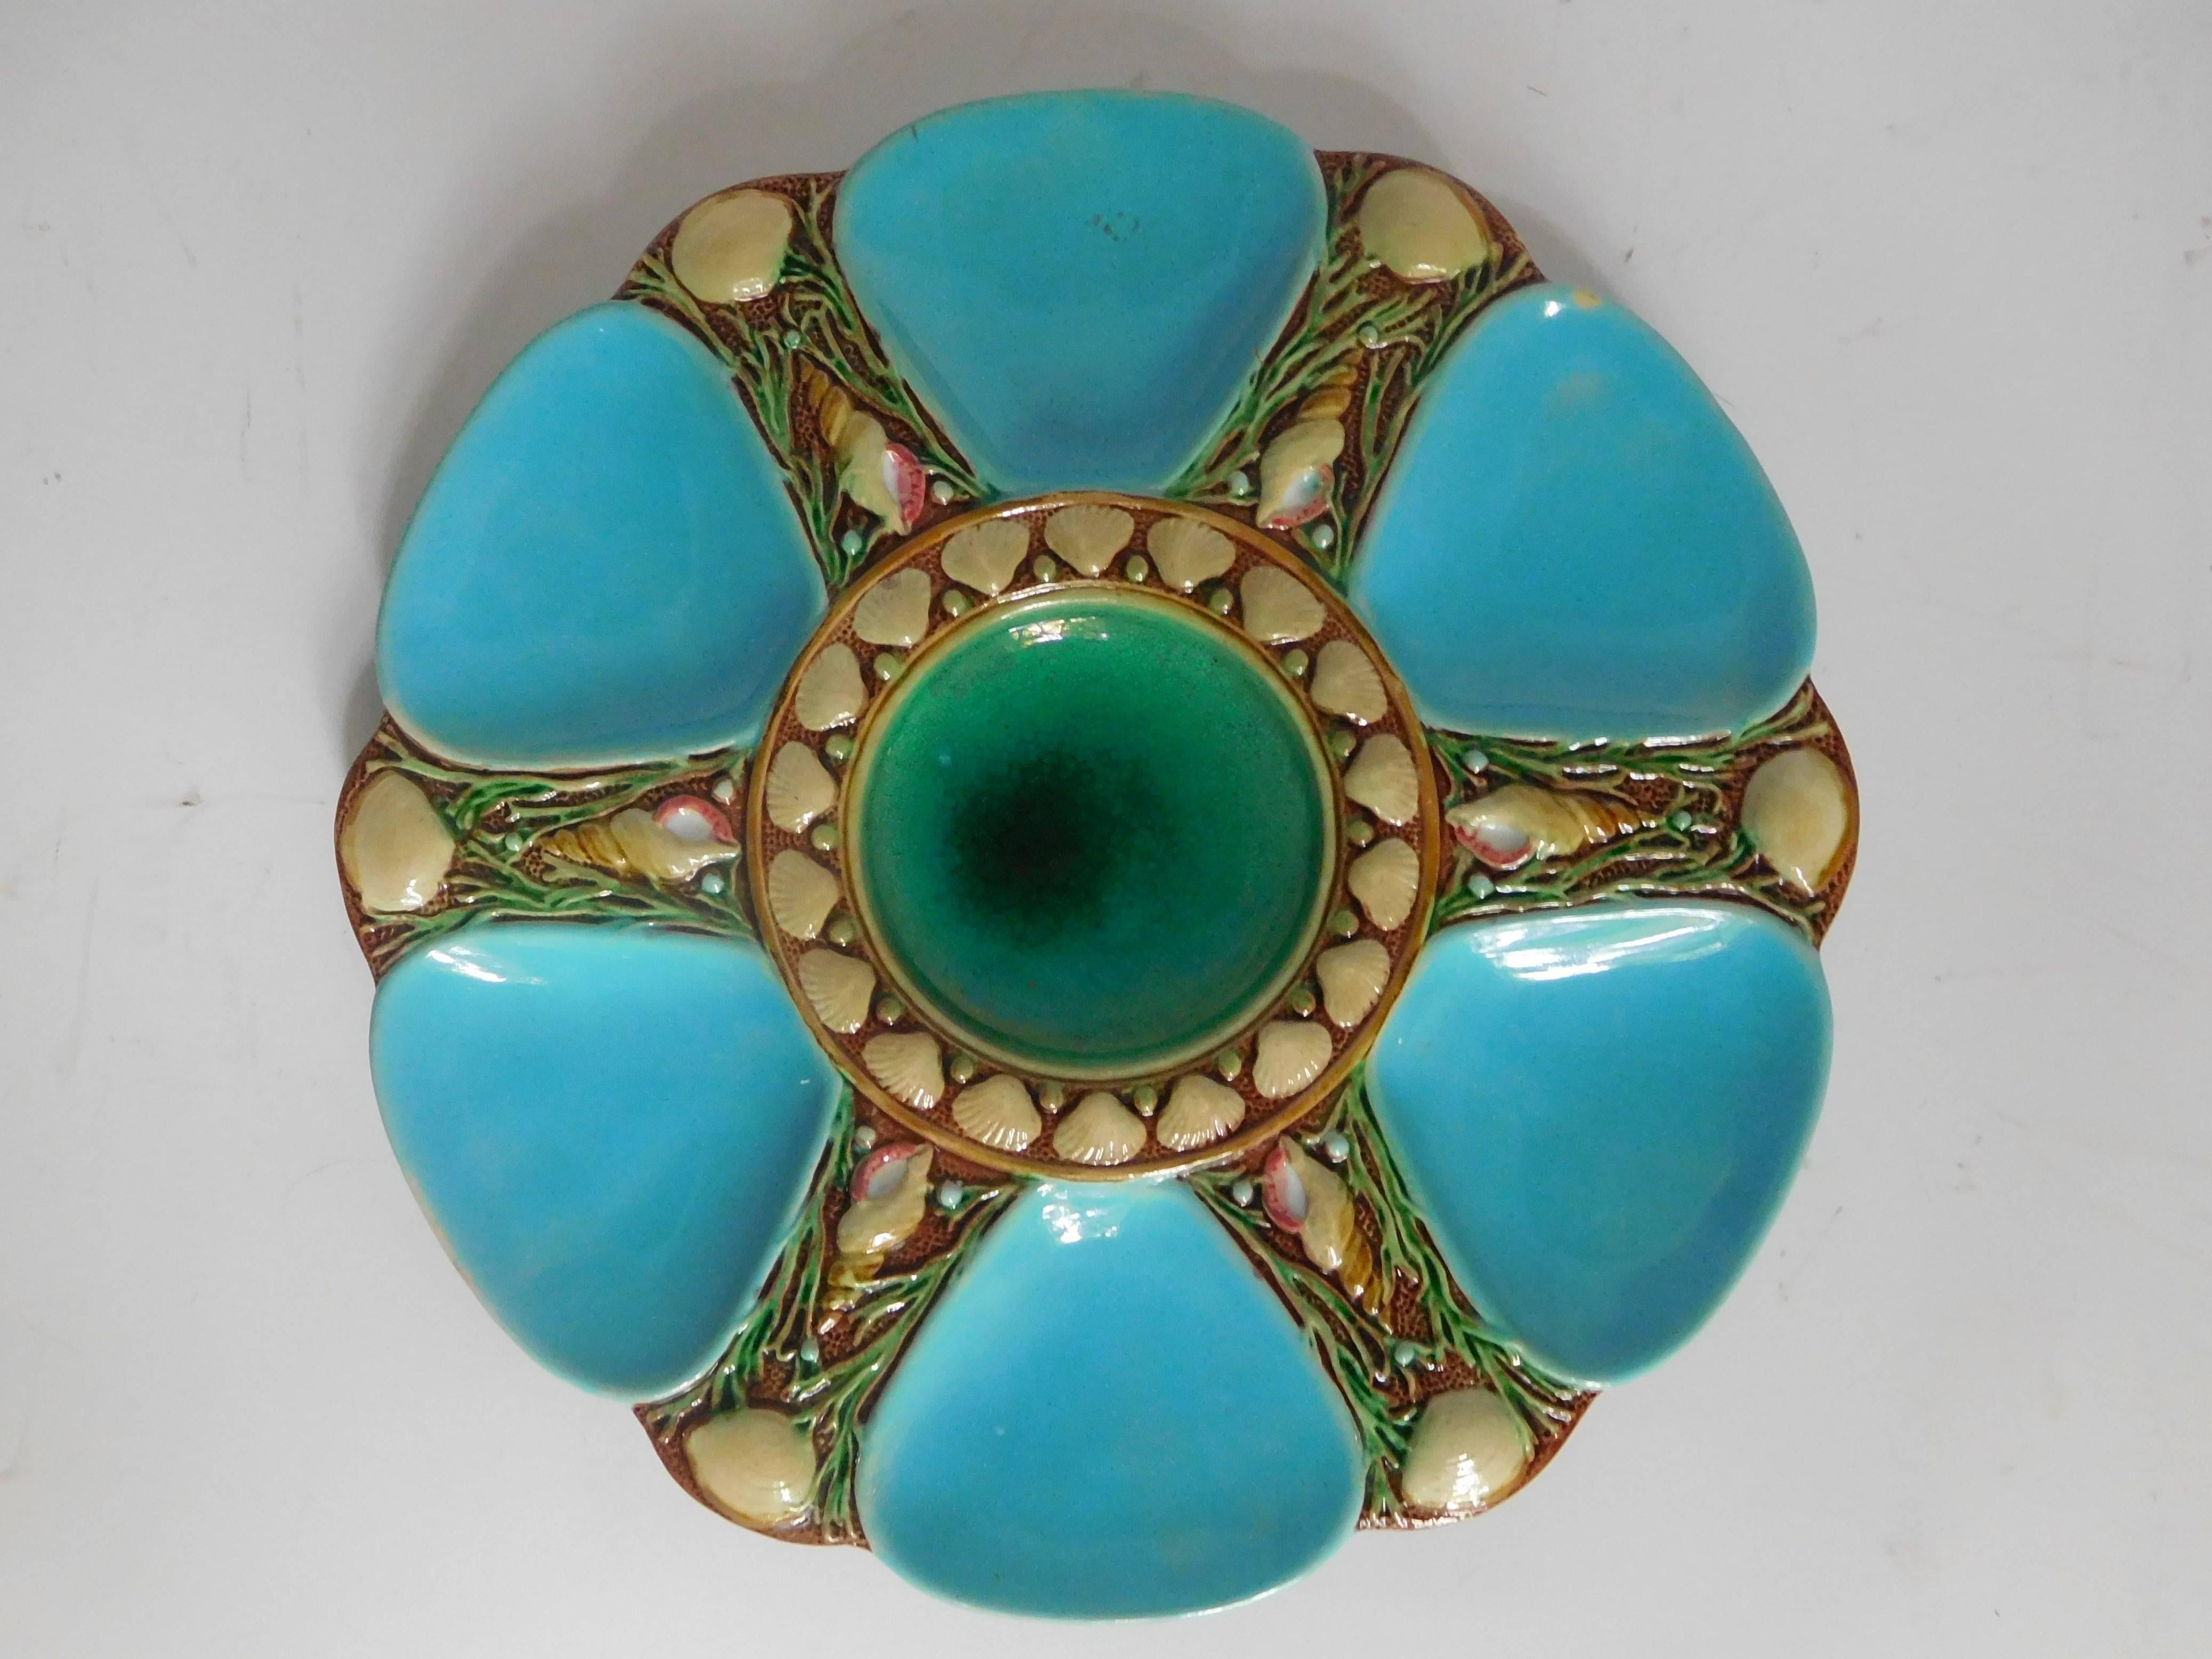 Victorian Minton Majolica Oyster Plate in Turquoise and Green, England, 1868